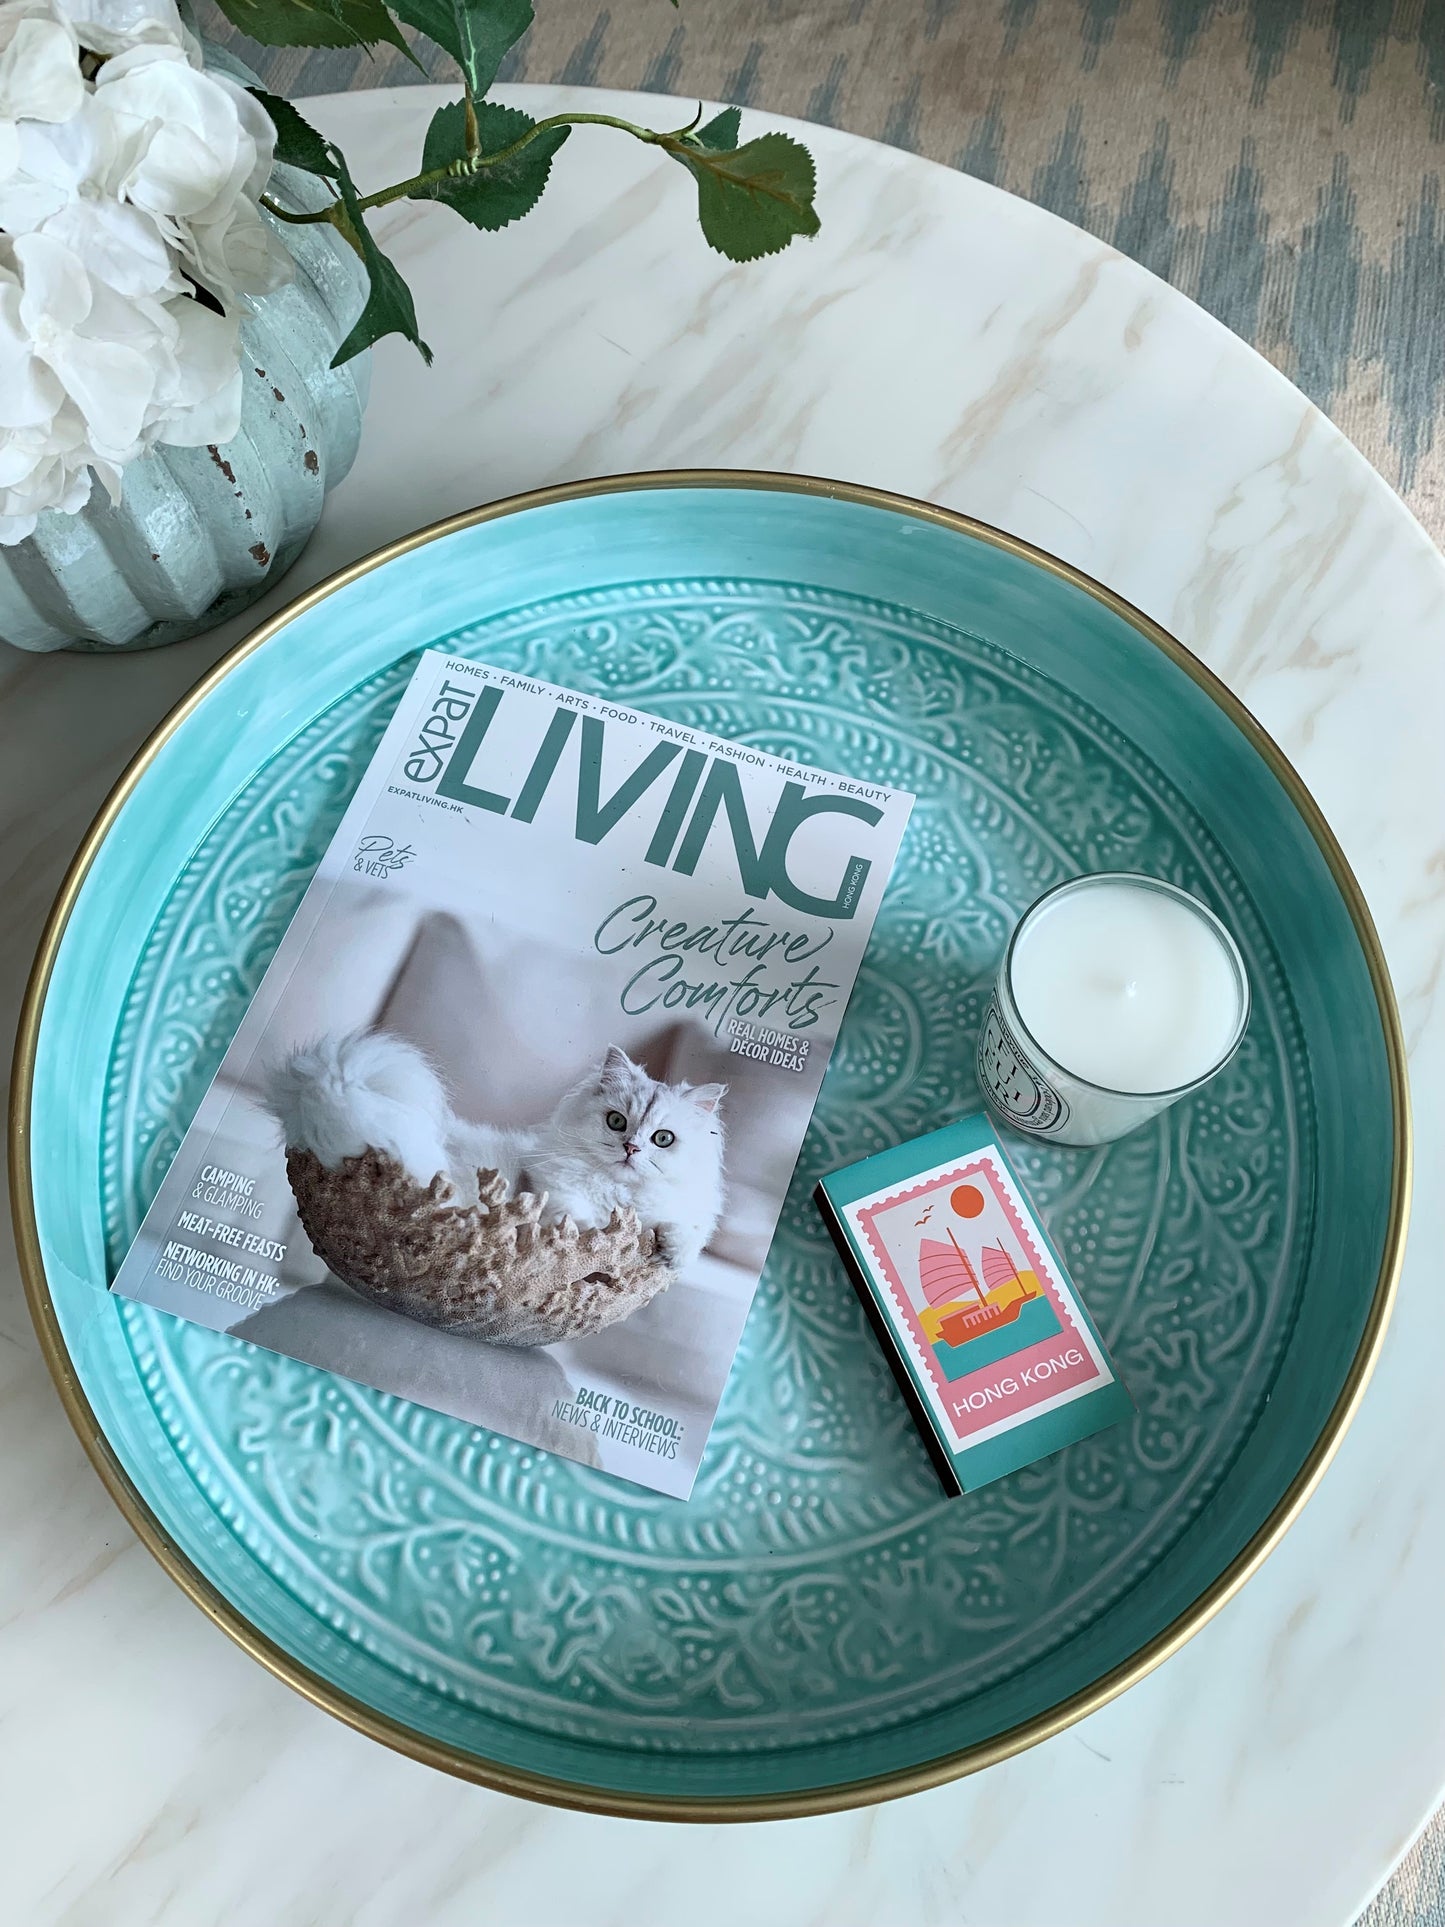 A large light blue tray on a coffee table with a magazine and candle on it.